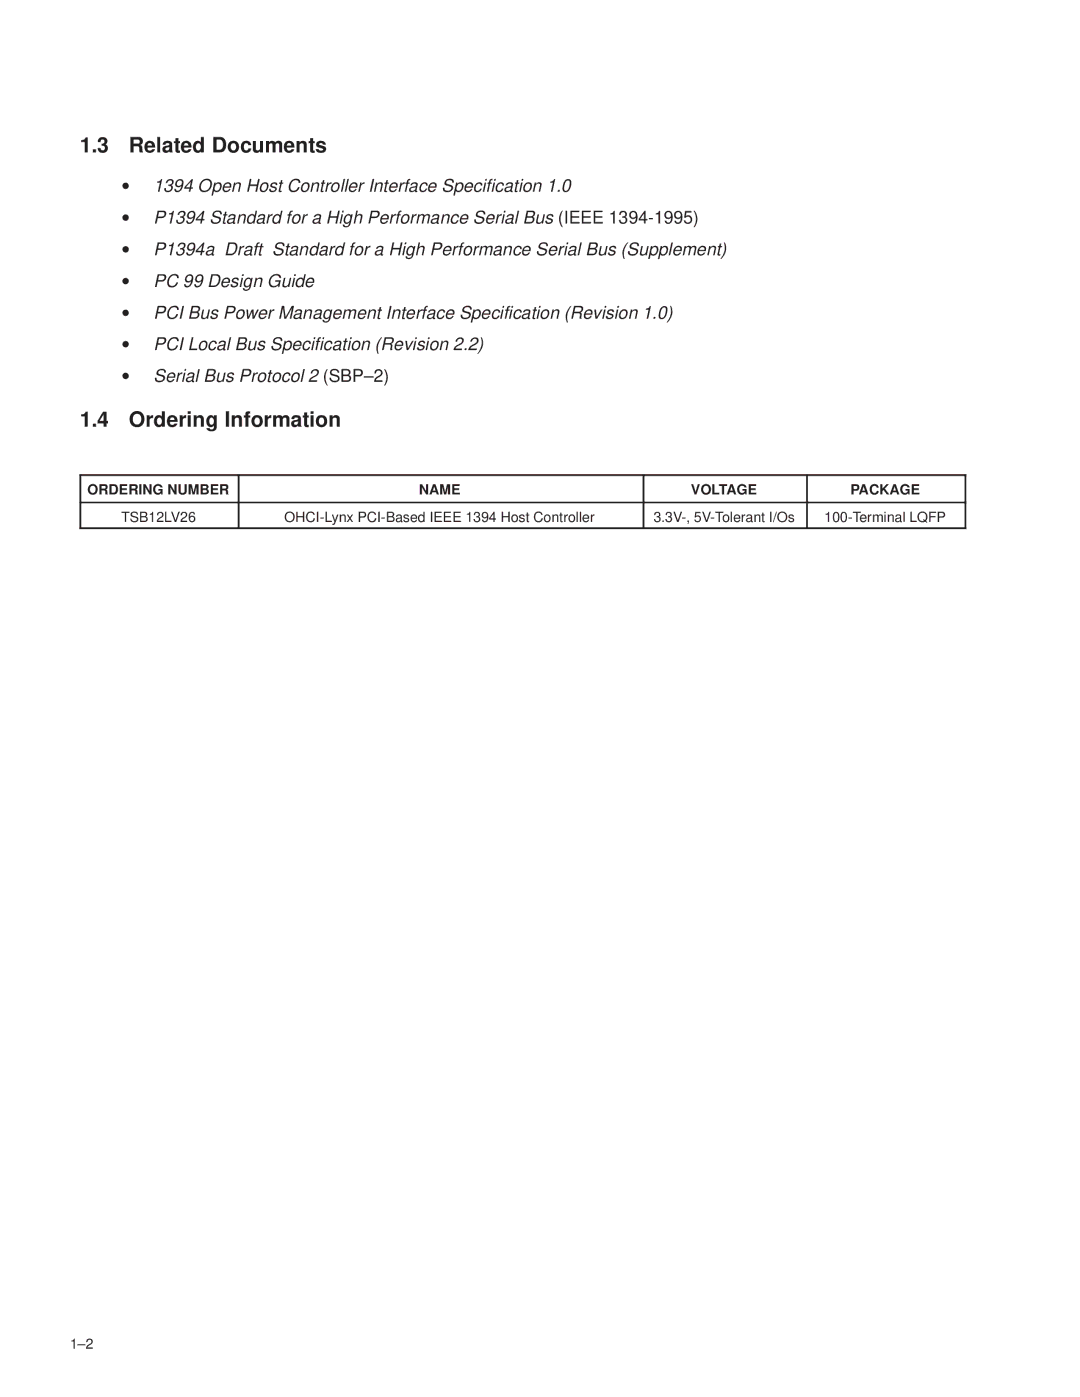 Texas Instruments TSB12LV26 Related Documents, Ordering Information, Ordering Number Name Voltage Package, Terminal Lqfp 